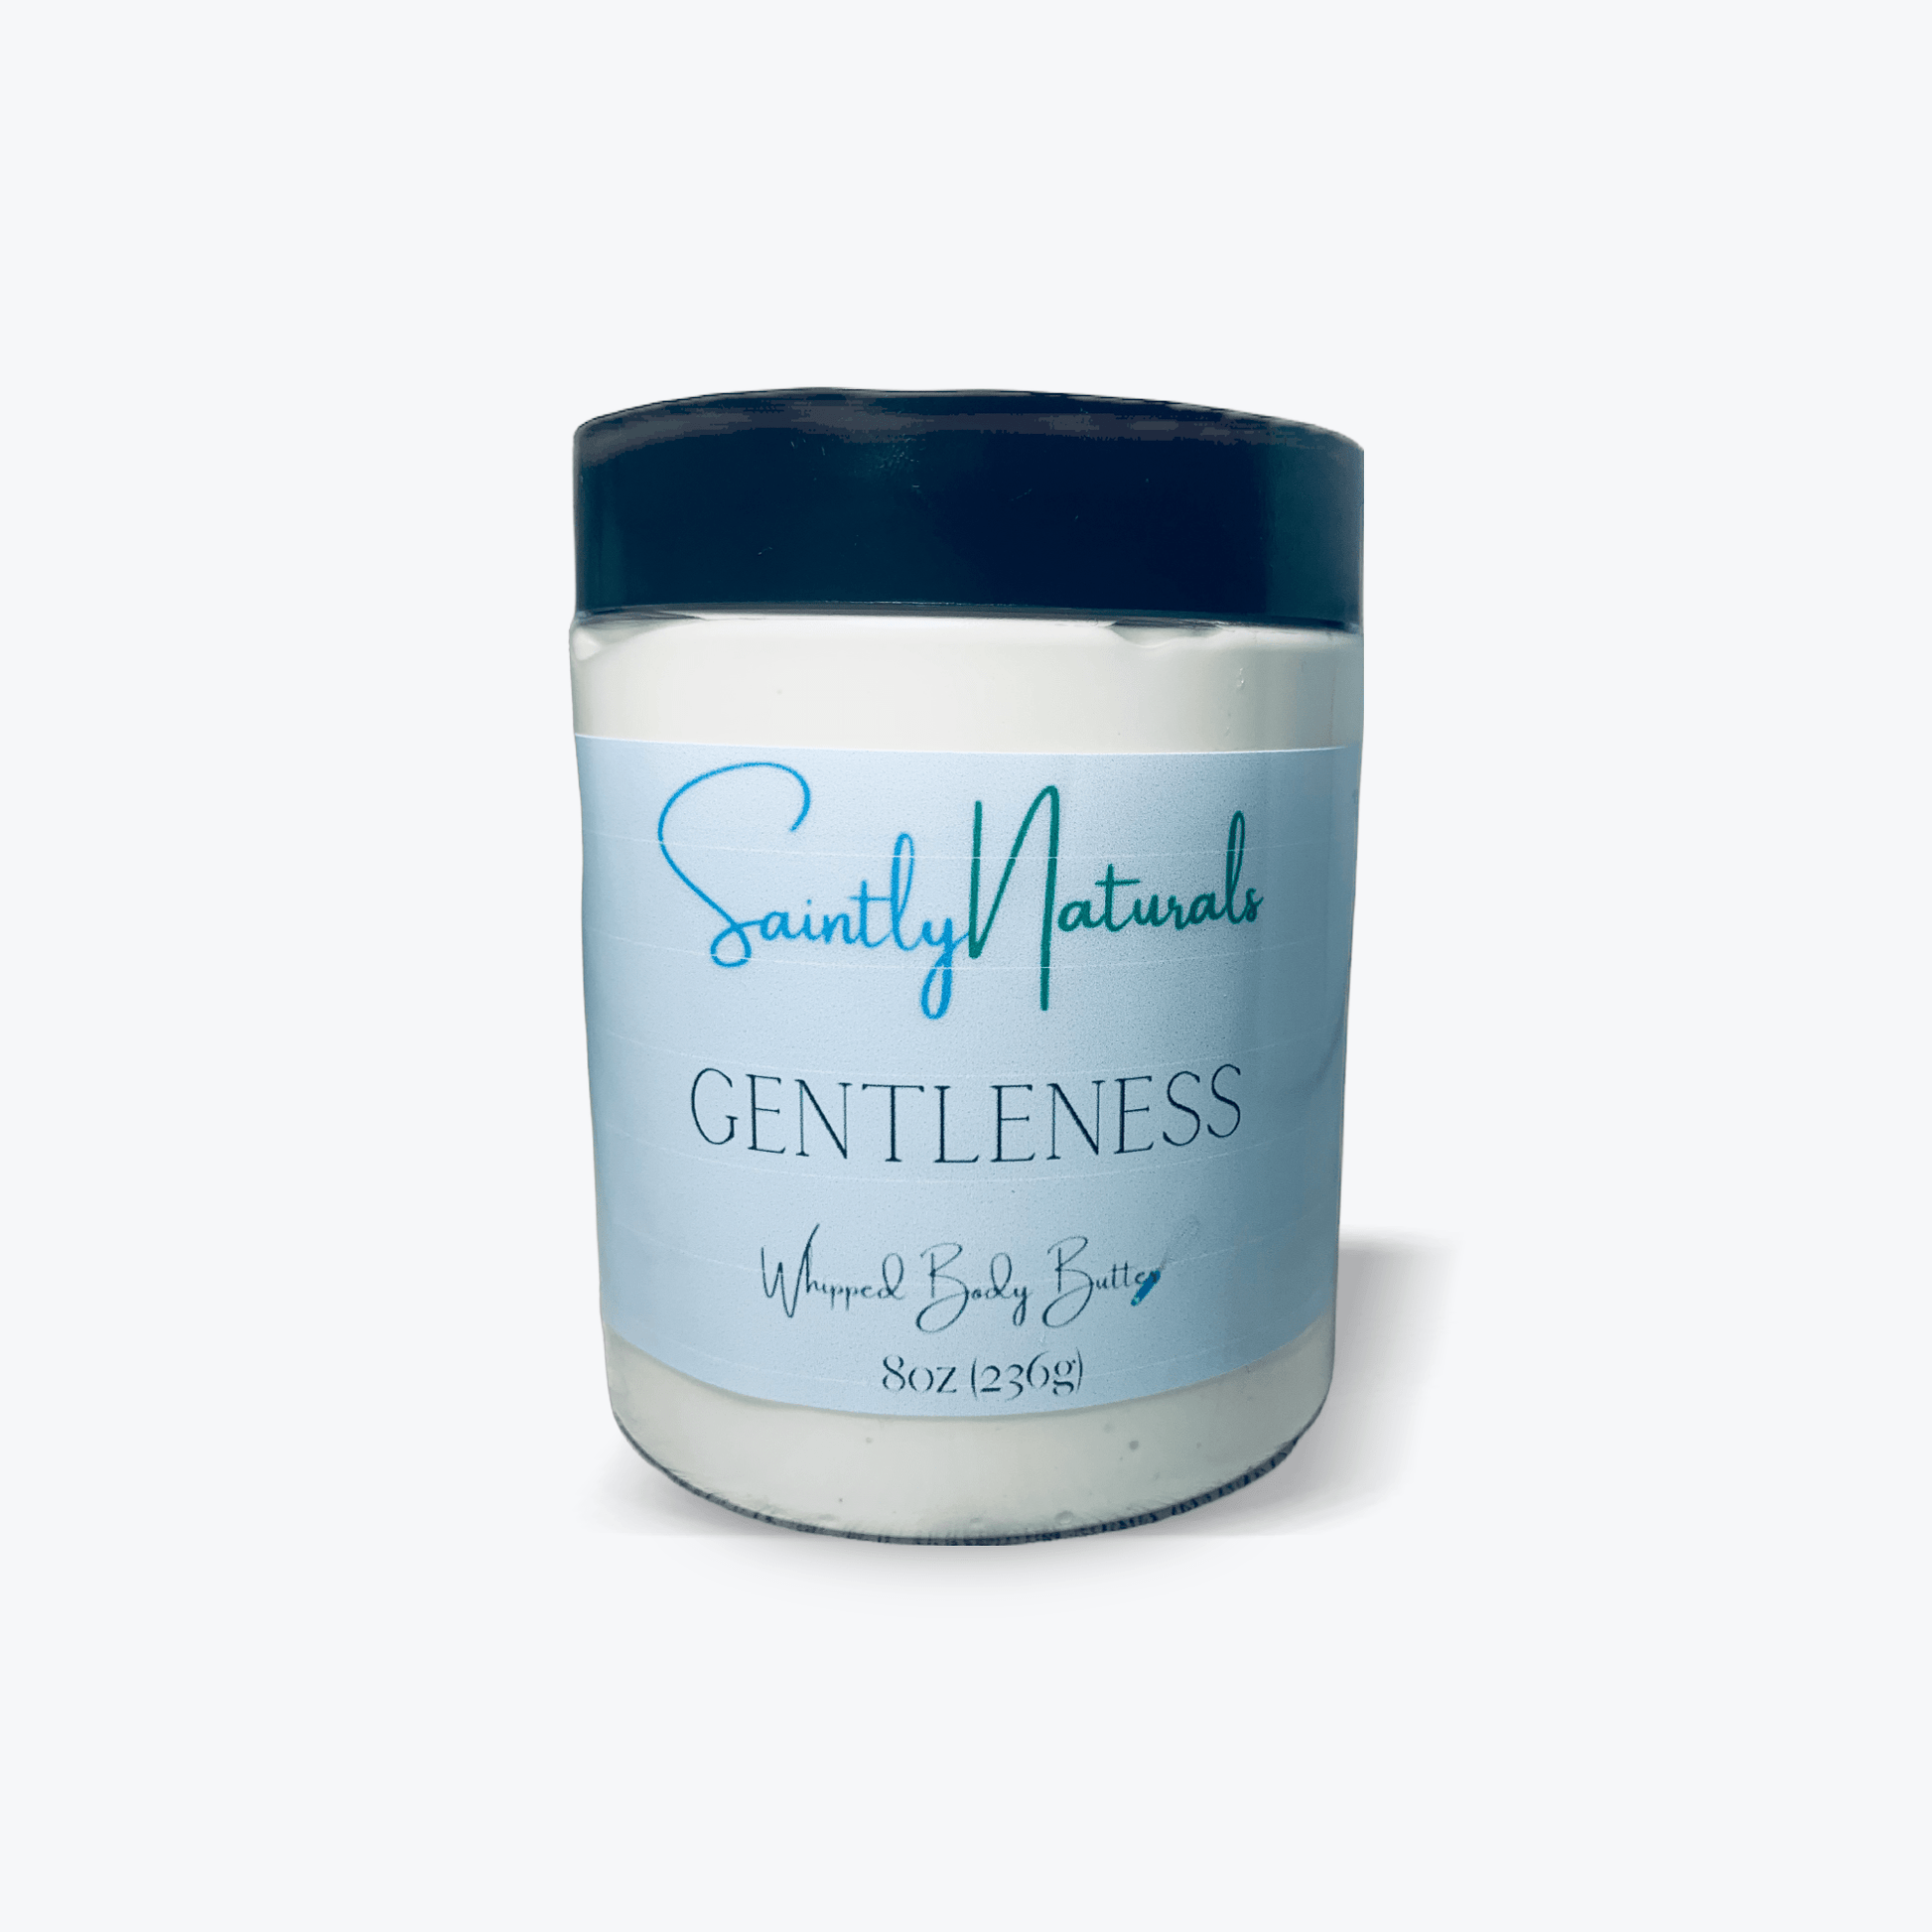 Gentleness Whipped Body Butter